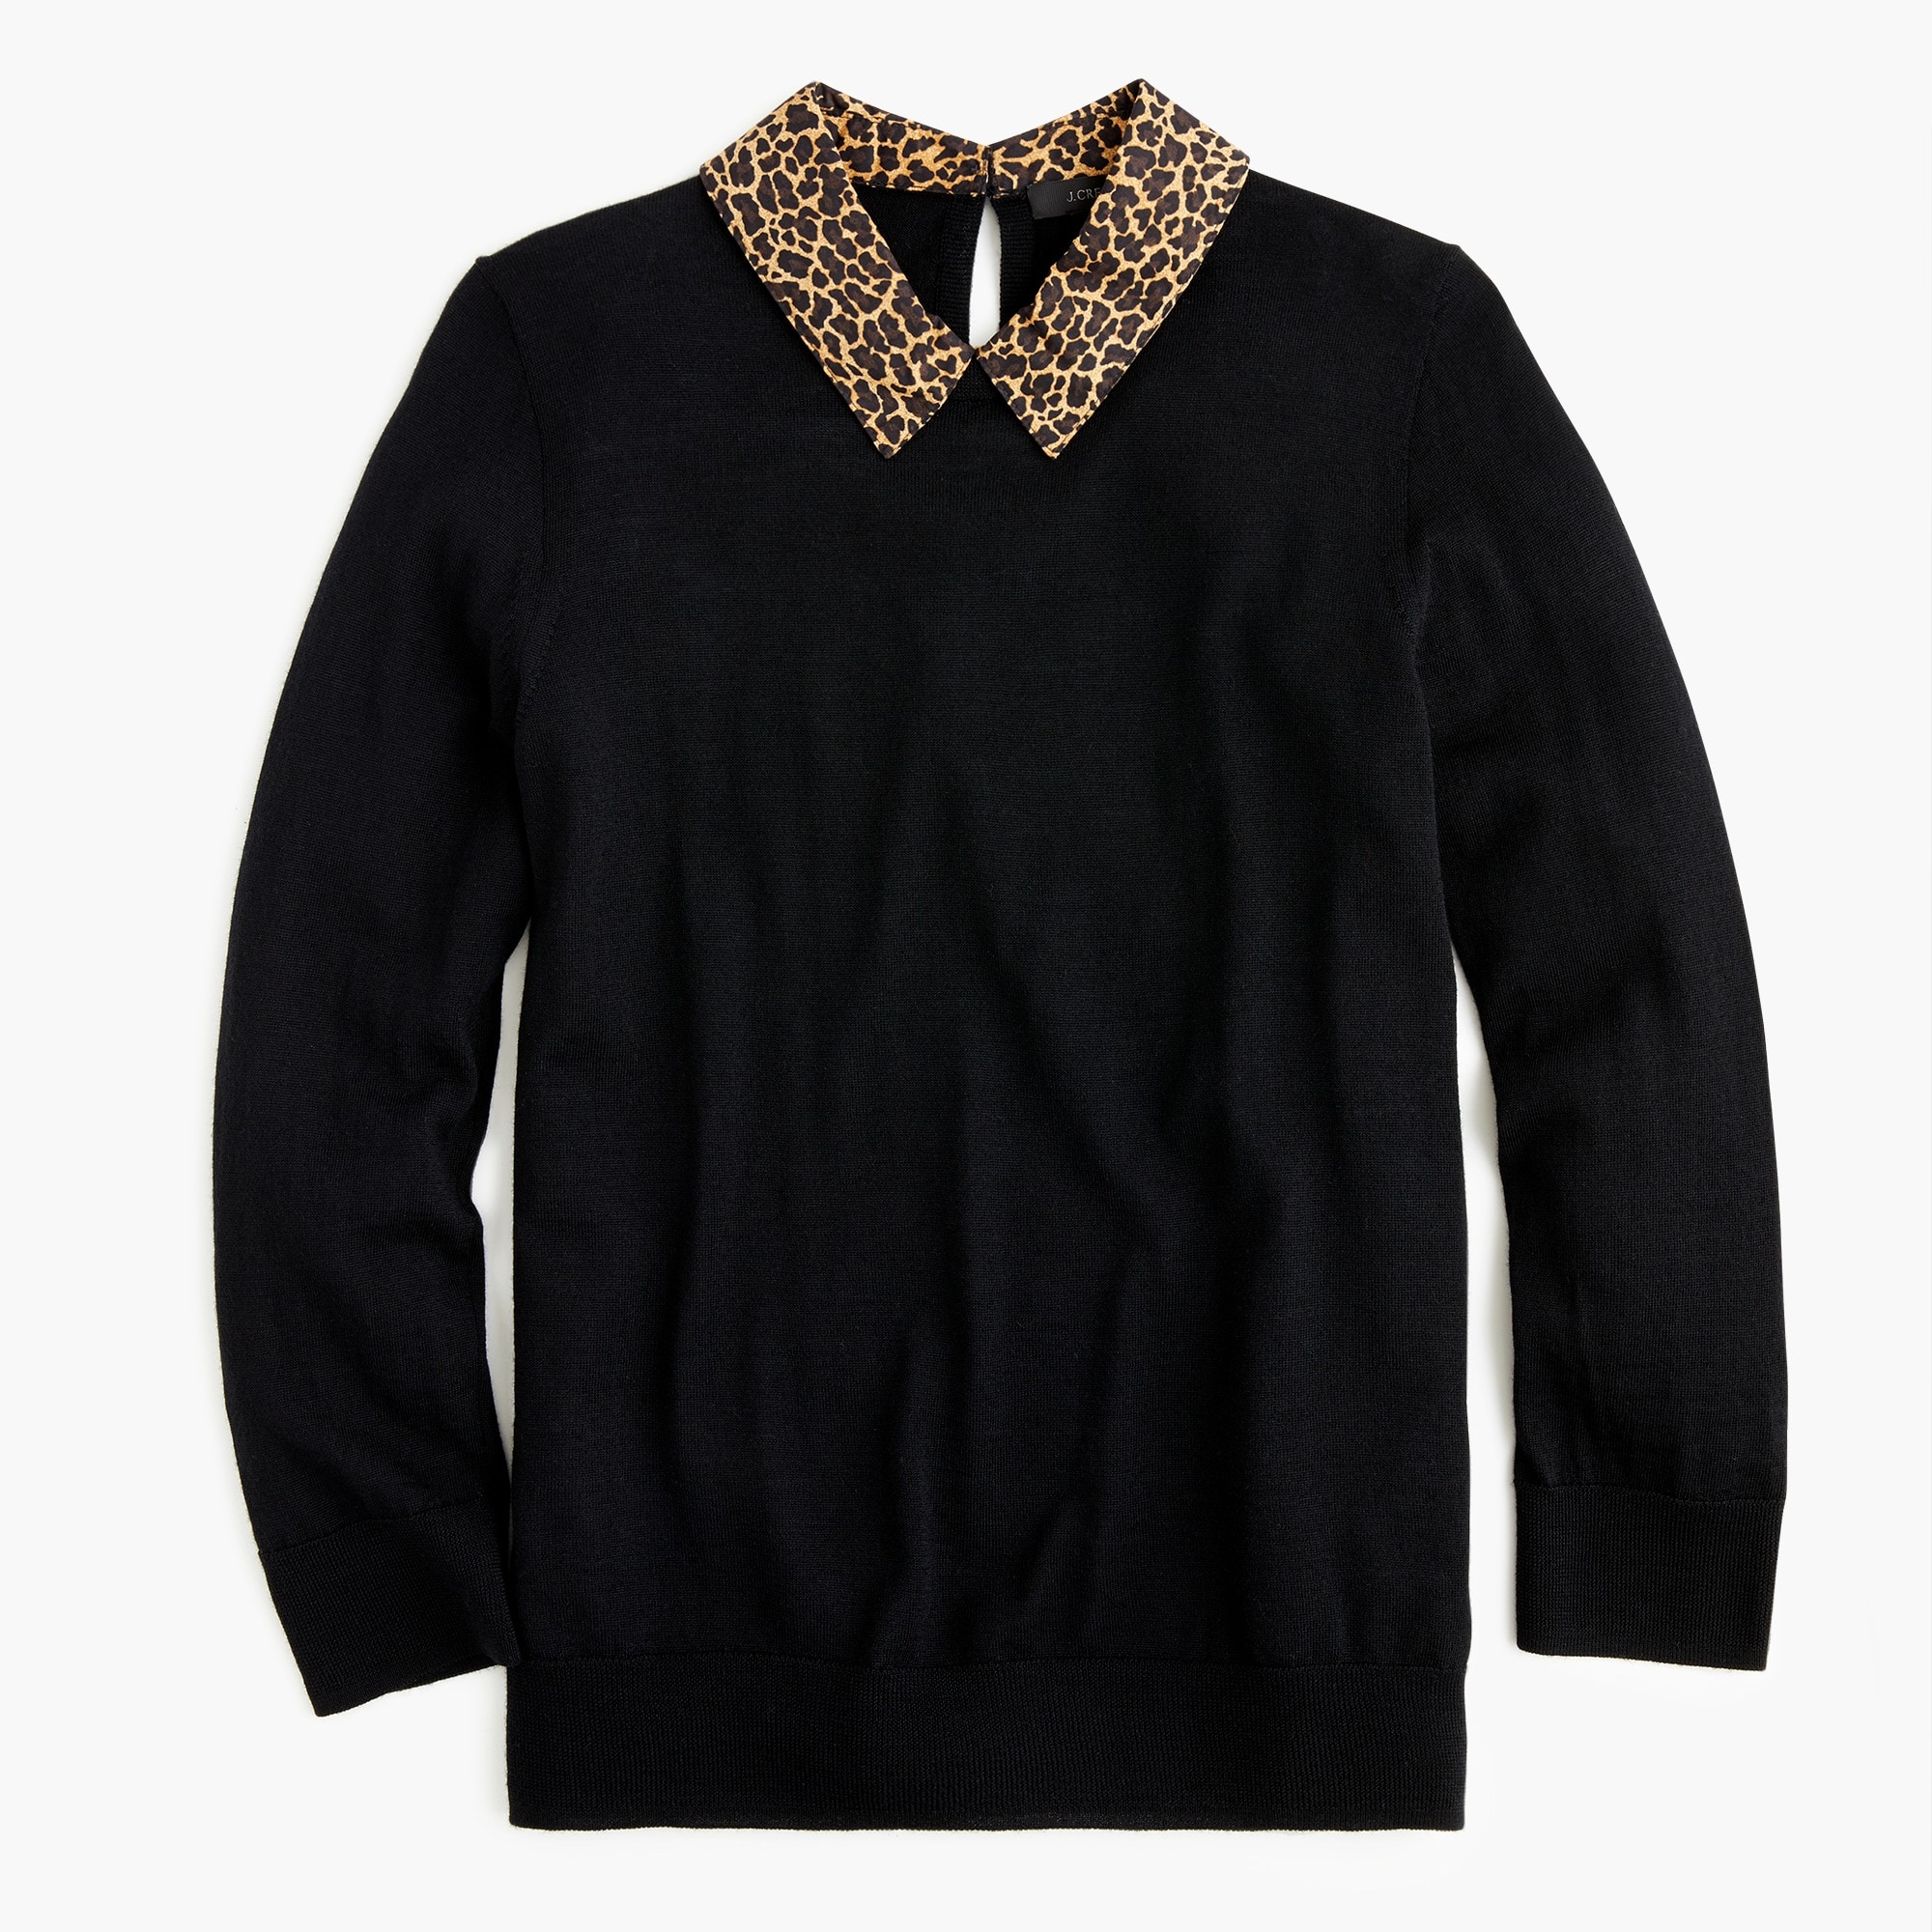 J.Crew: Tippi Sweater With Leopard Collar For Women